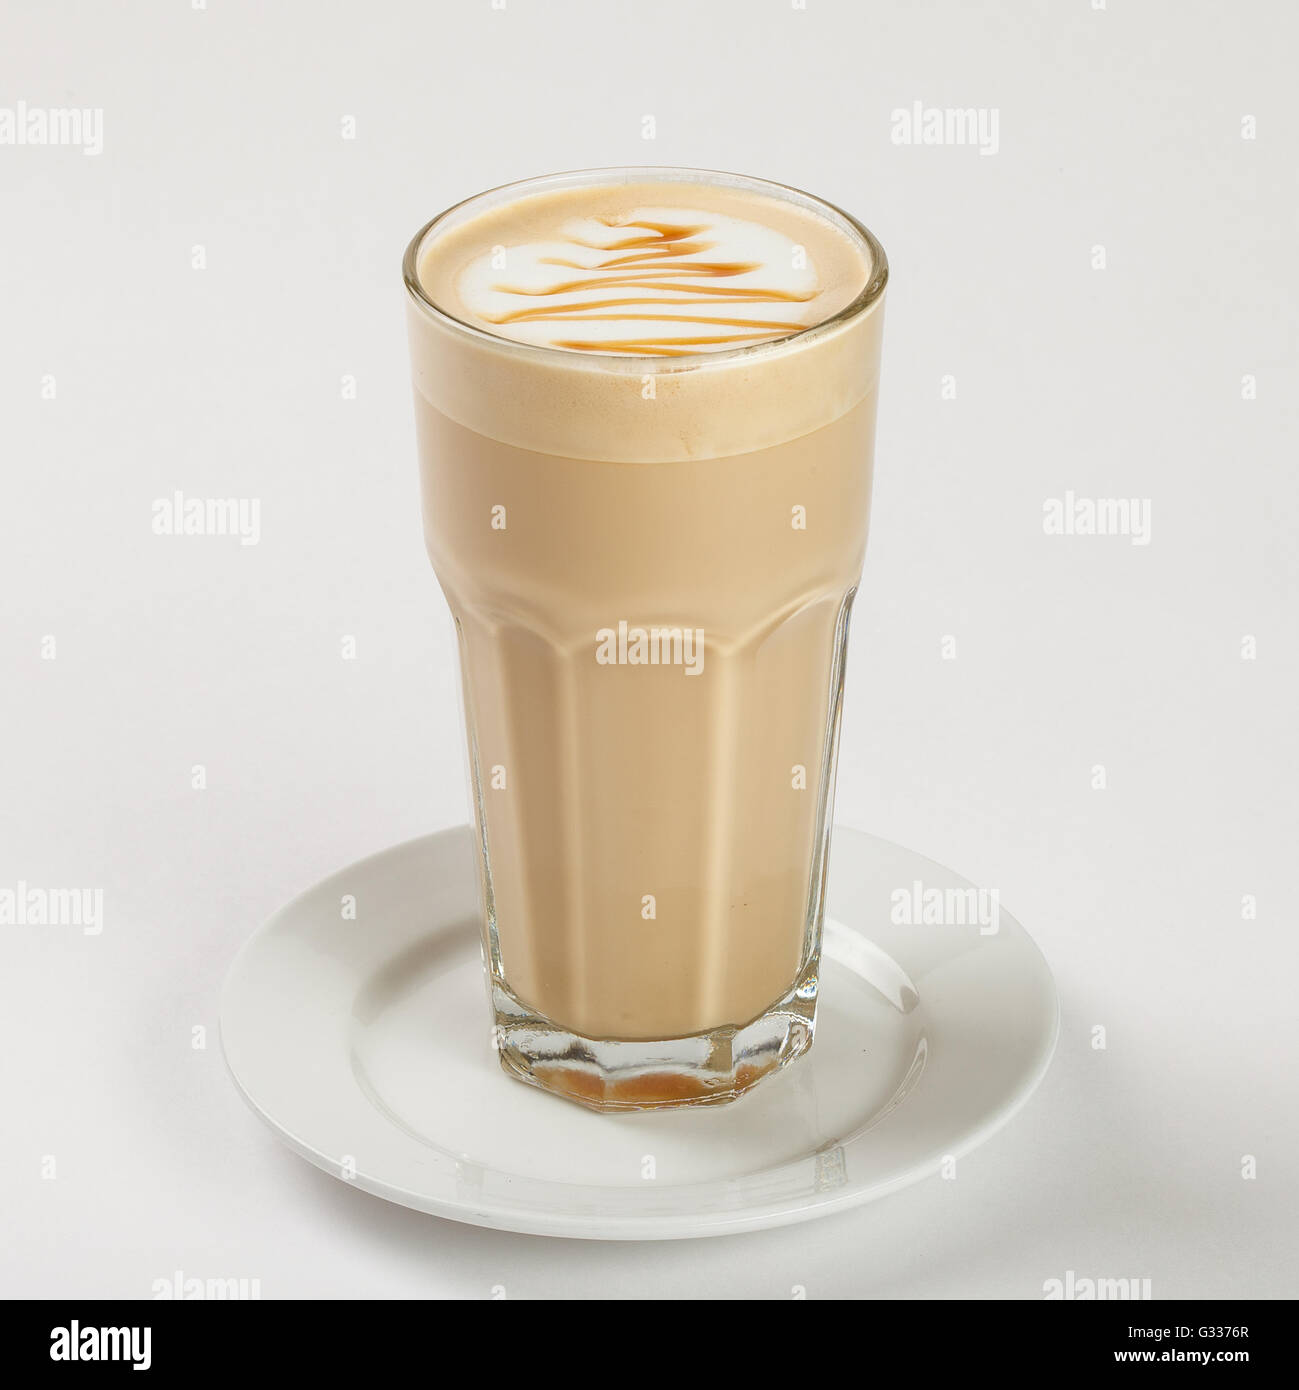 Delicious latte in a tall glass on the plate on white background. Close up side view. Stock Photo